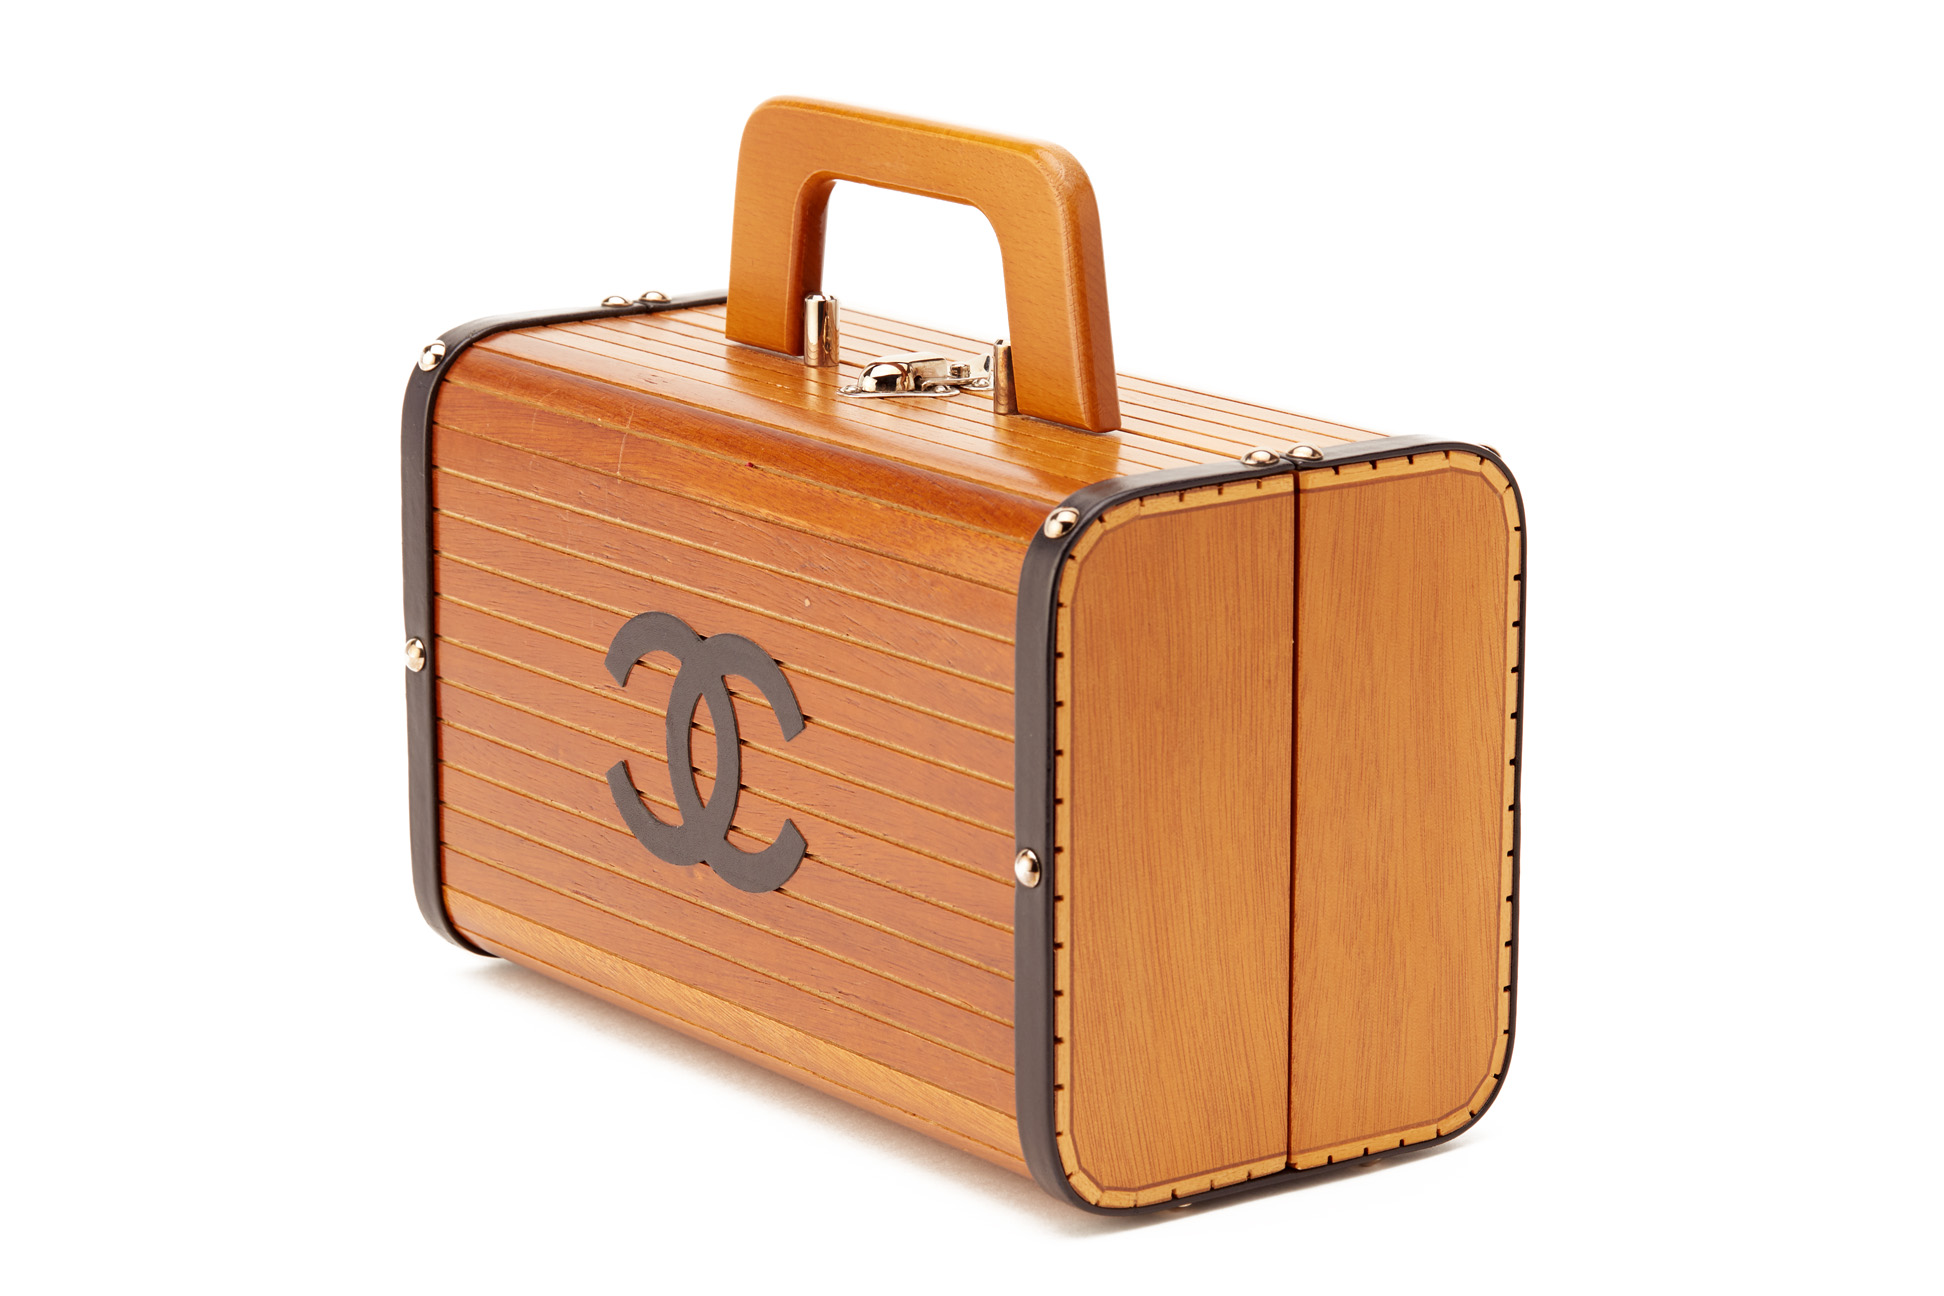 A CHANEL LIMITED EDITION WOOD CRUISE TRUNK BAG - Image 4 of 16